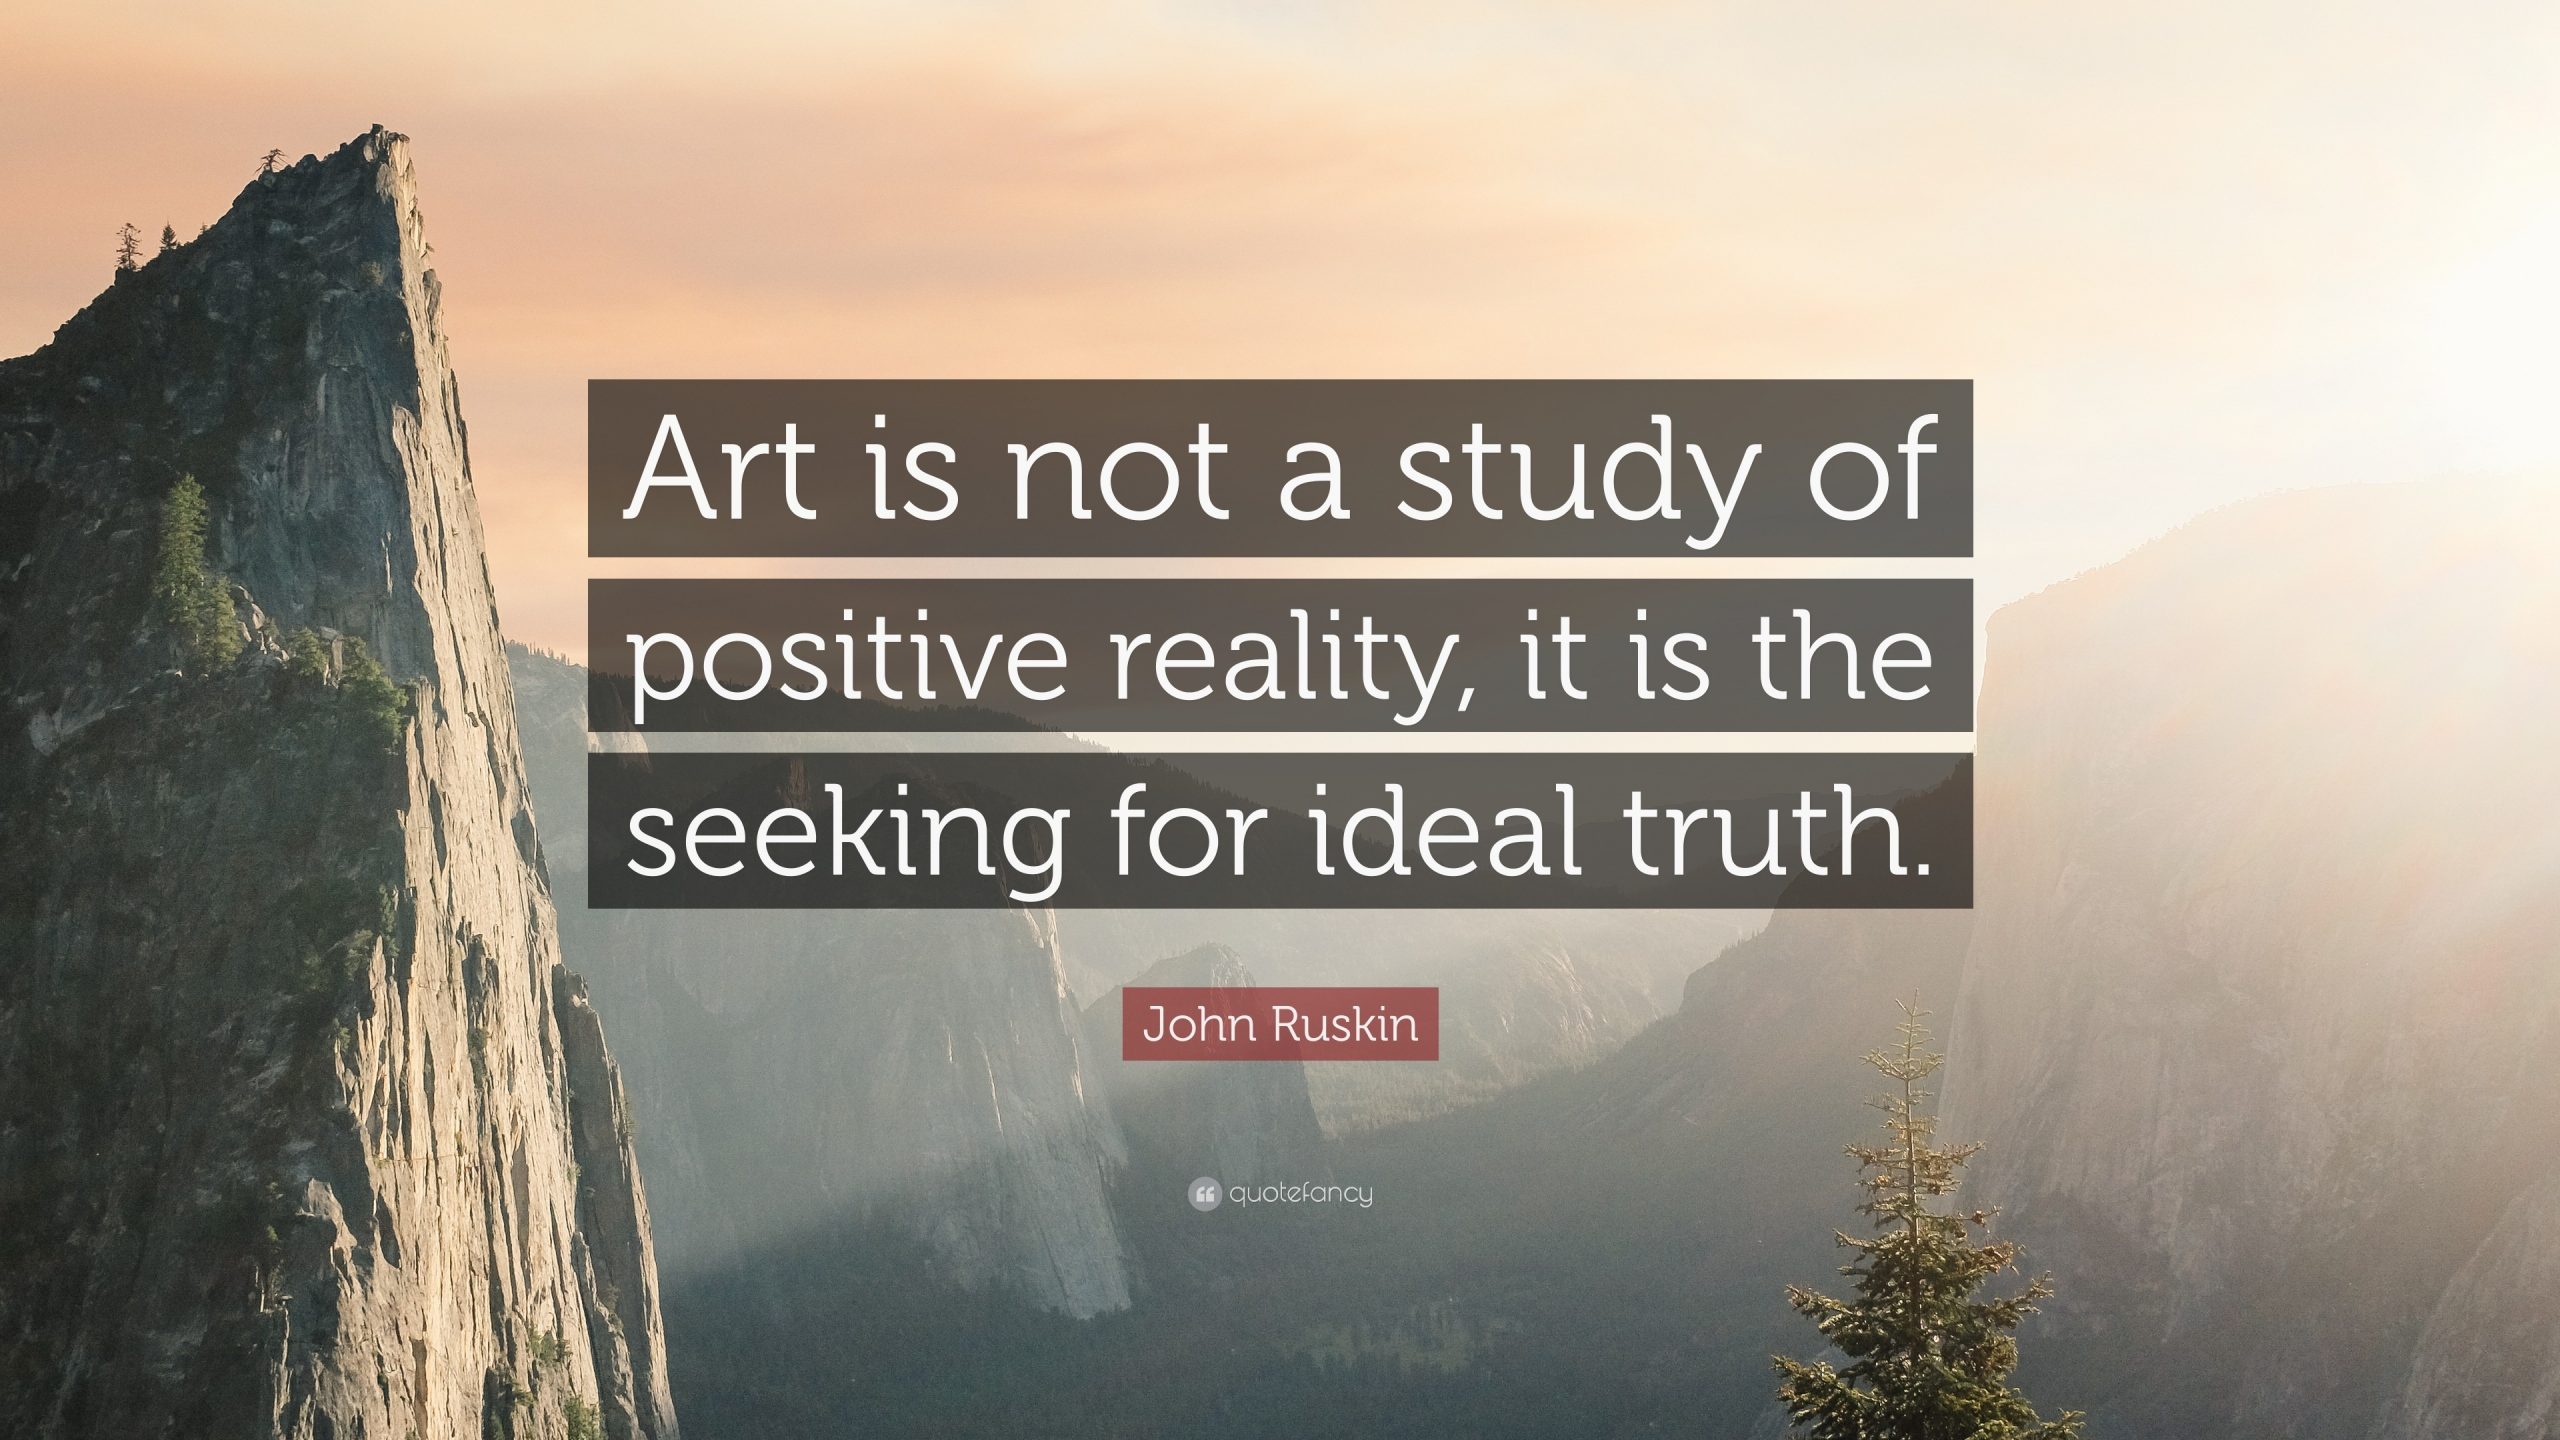 “Art is not a study of positive reality, it is the seeking for ideal truth.” – John Ruskin